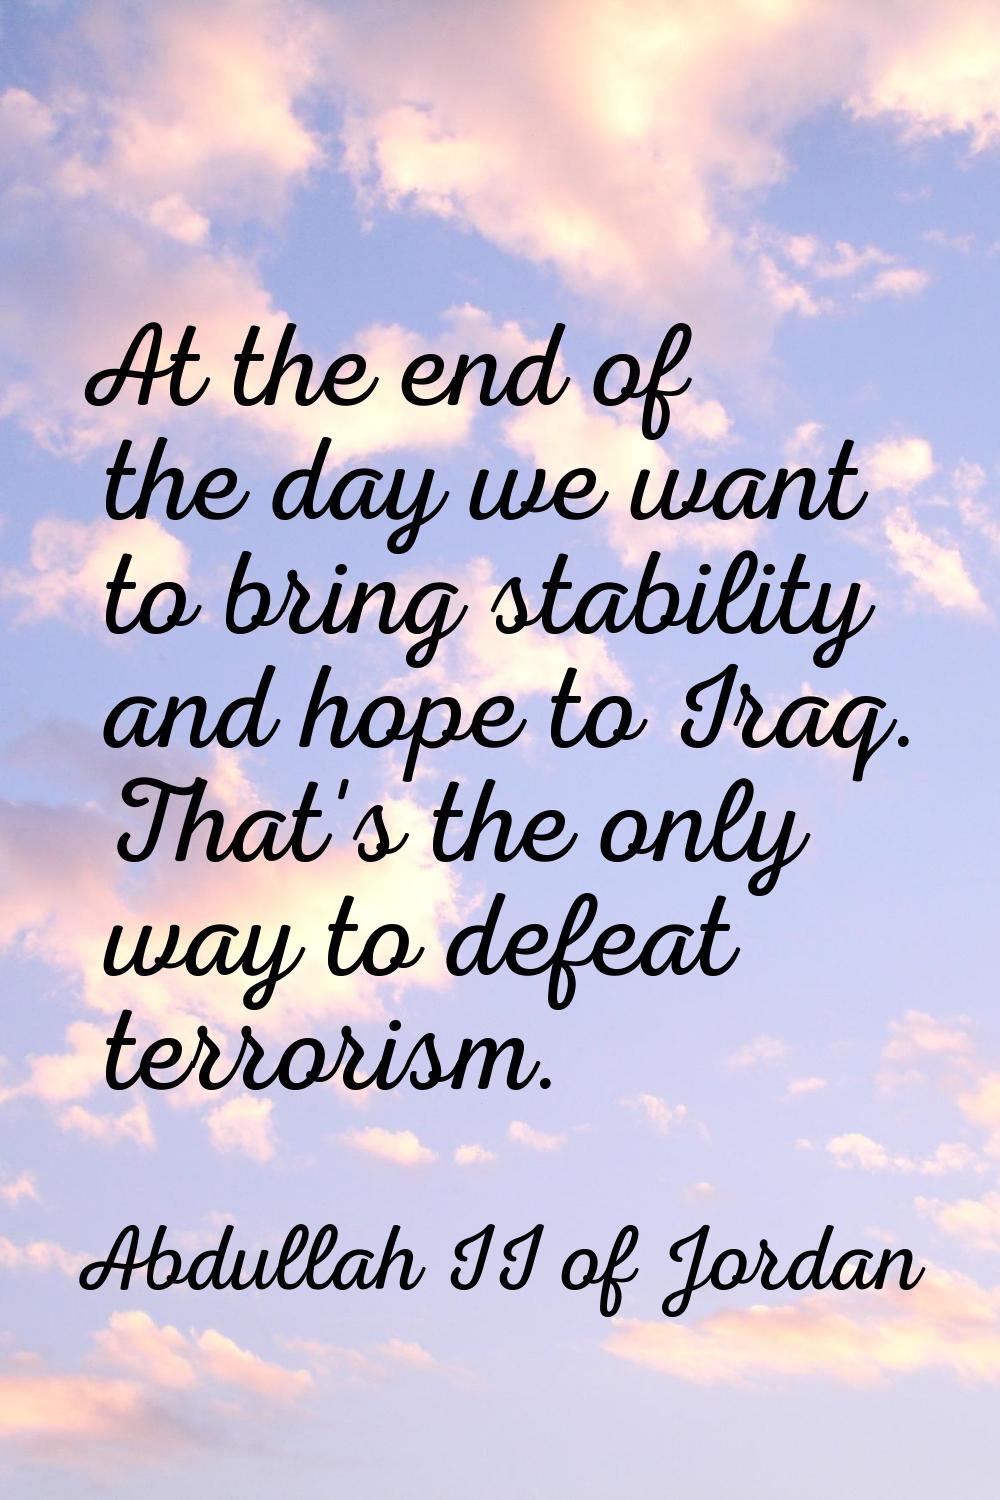 At the end of the day we want to bring stability and hope to Iraq. That's the only way to defeat te